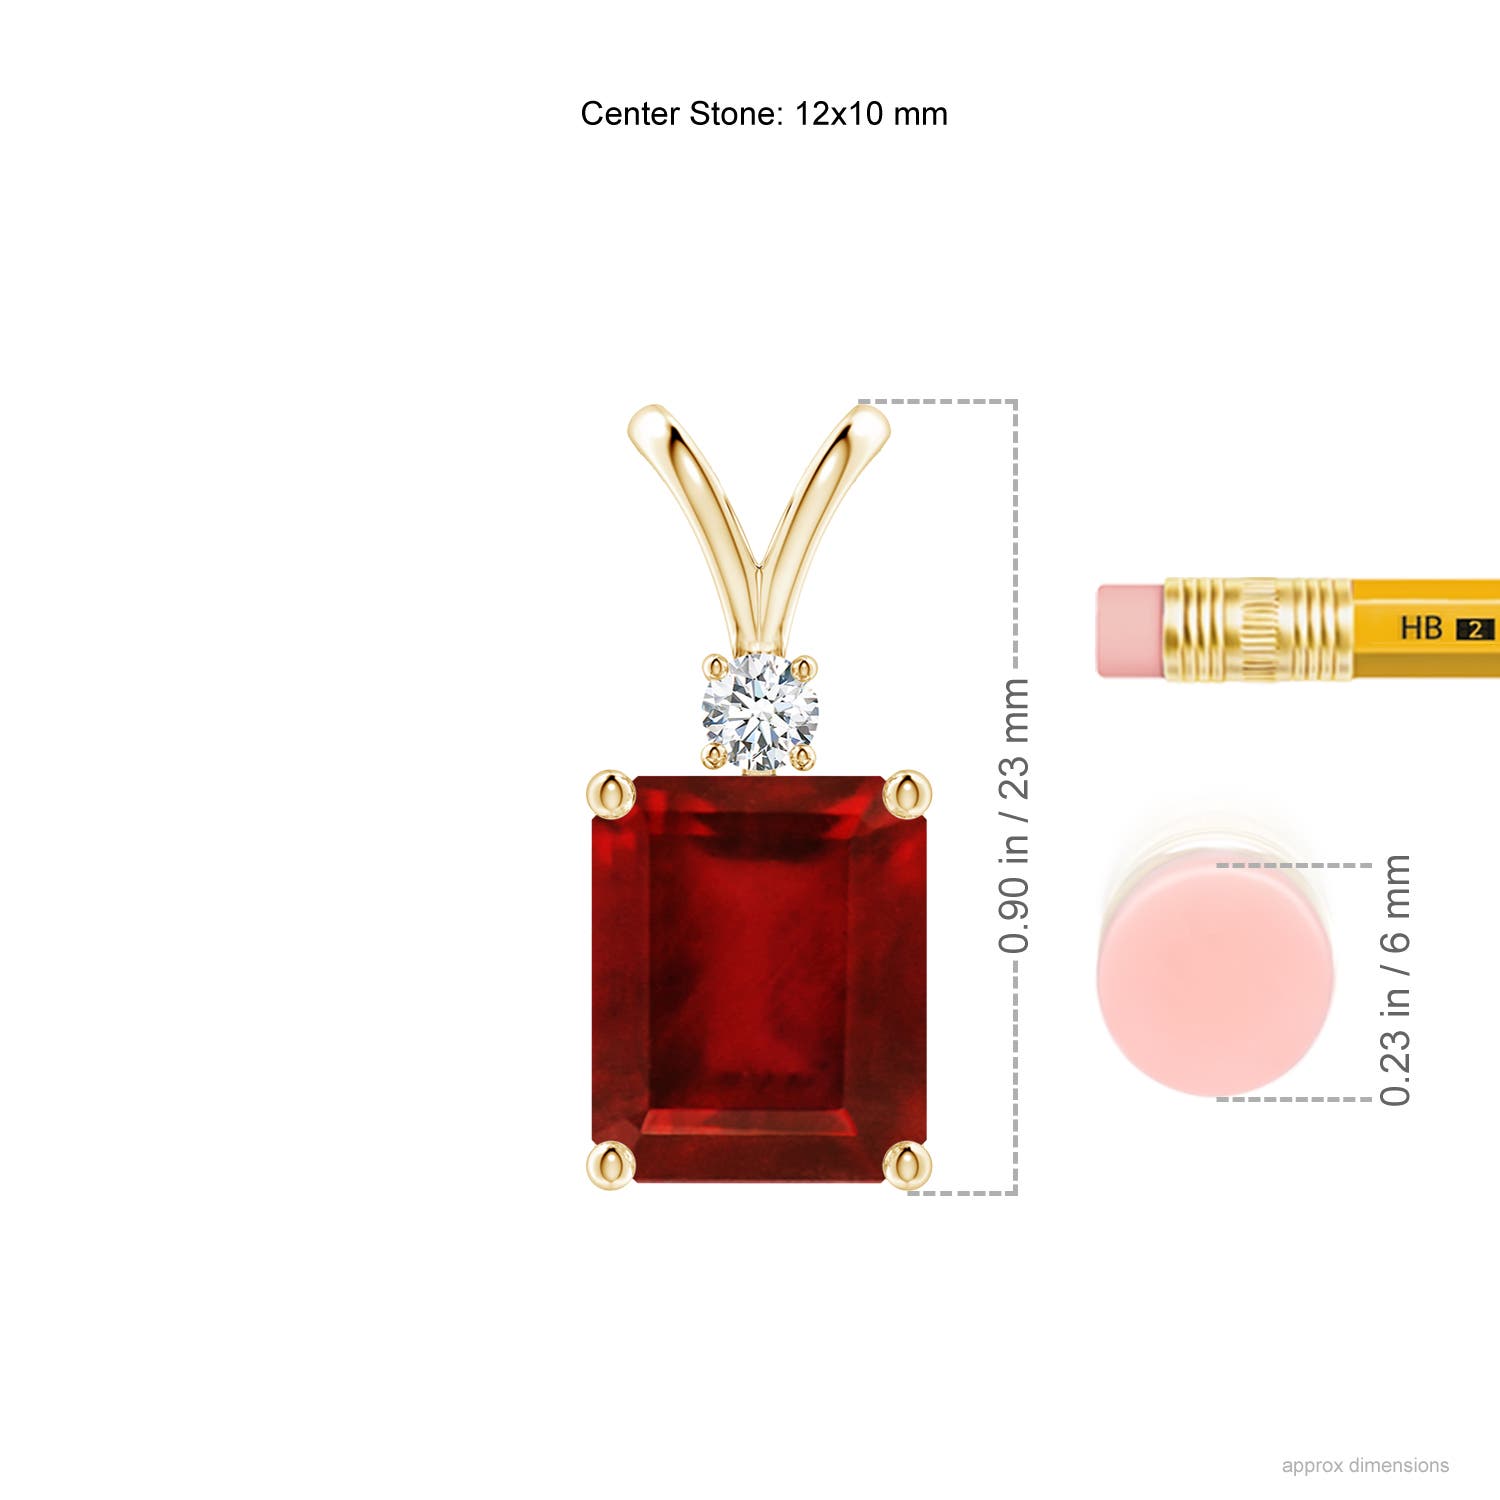 AAAA - Ruby / 6.41 CT / 14 KT Yellow Gold